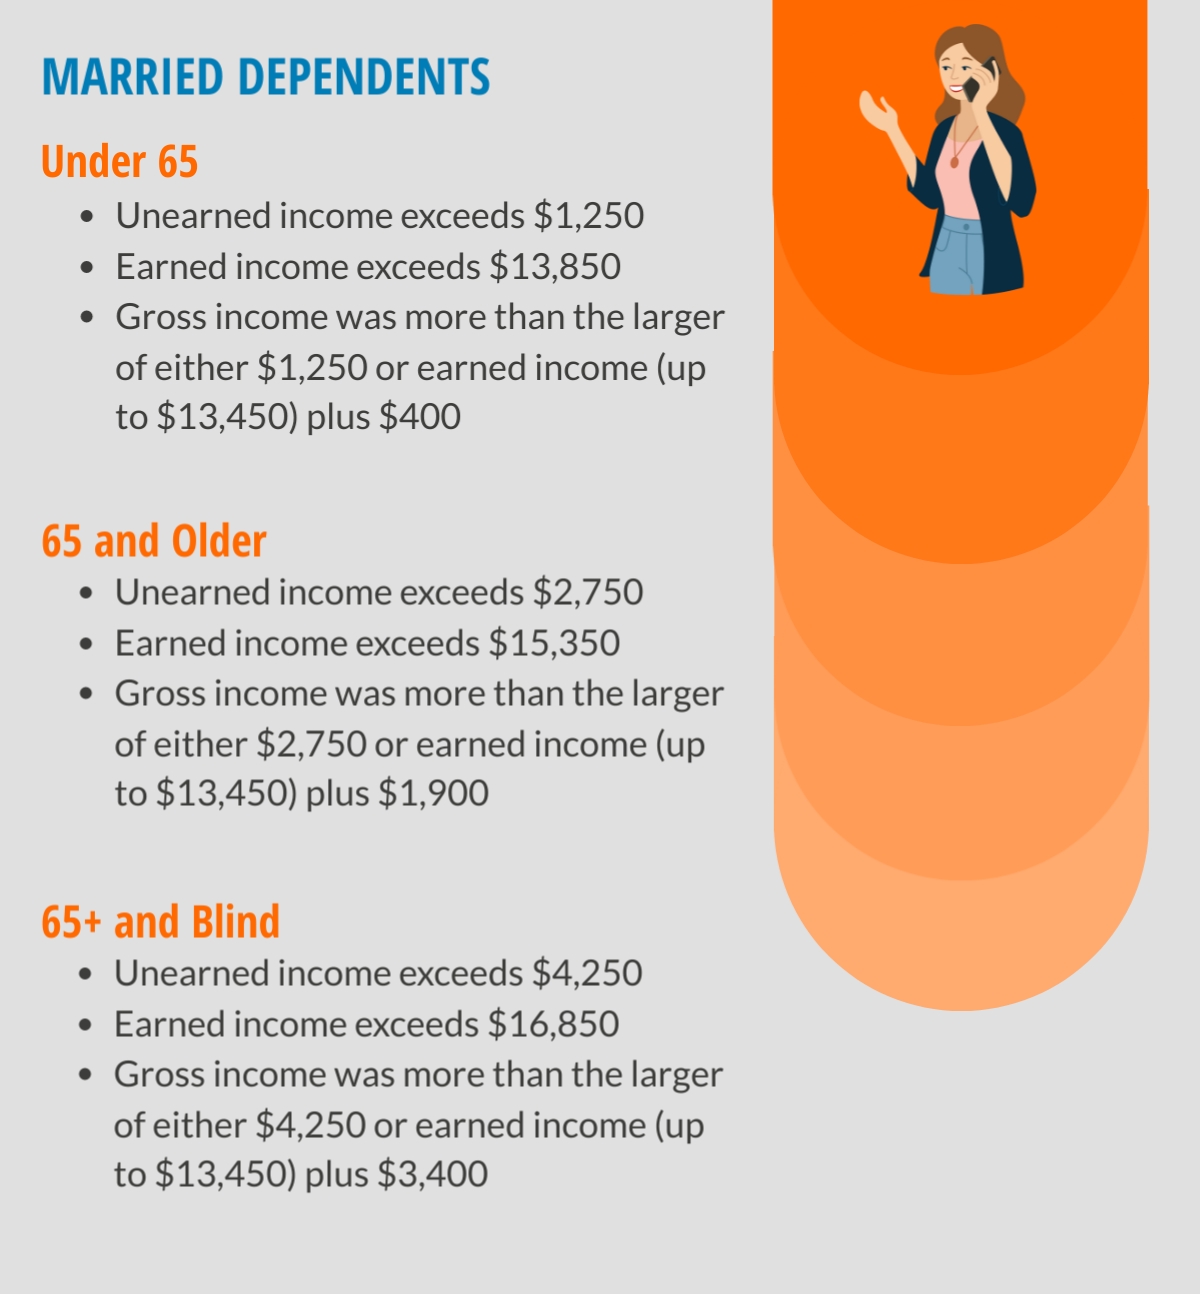 filing requirements for married dependents